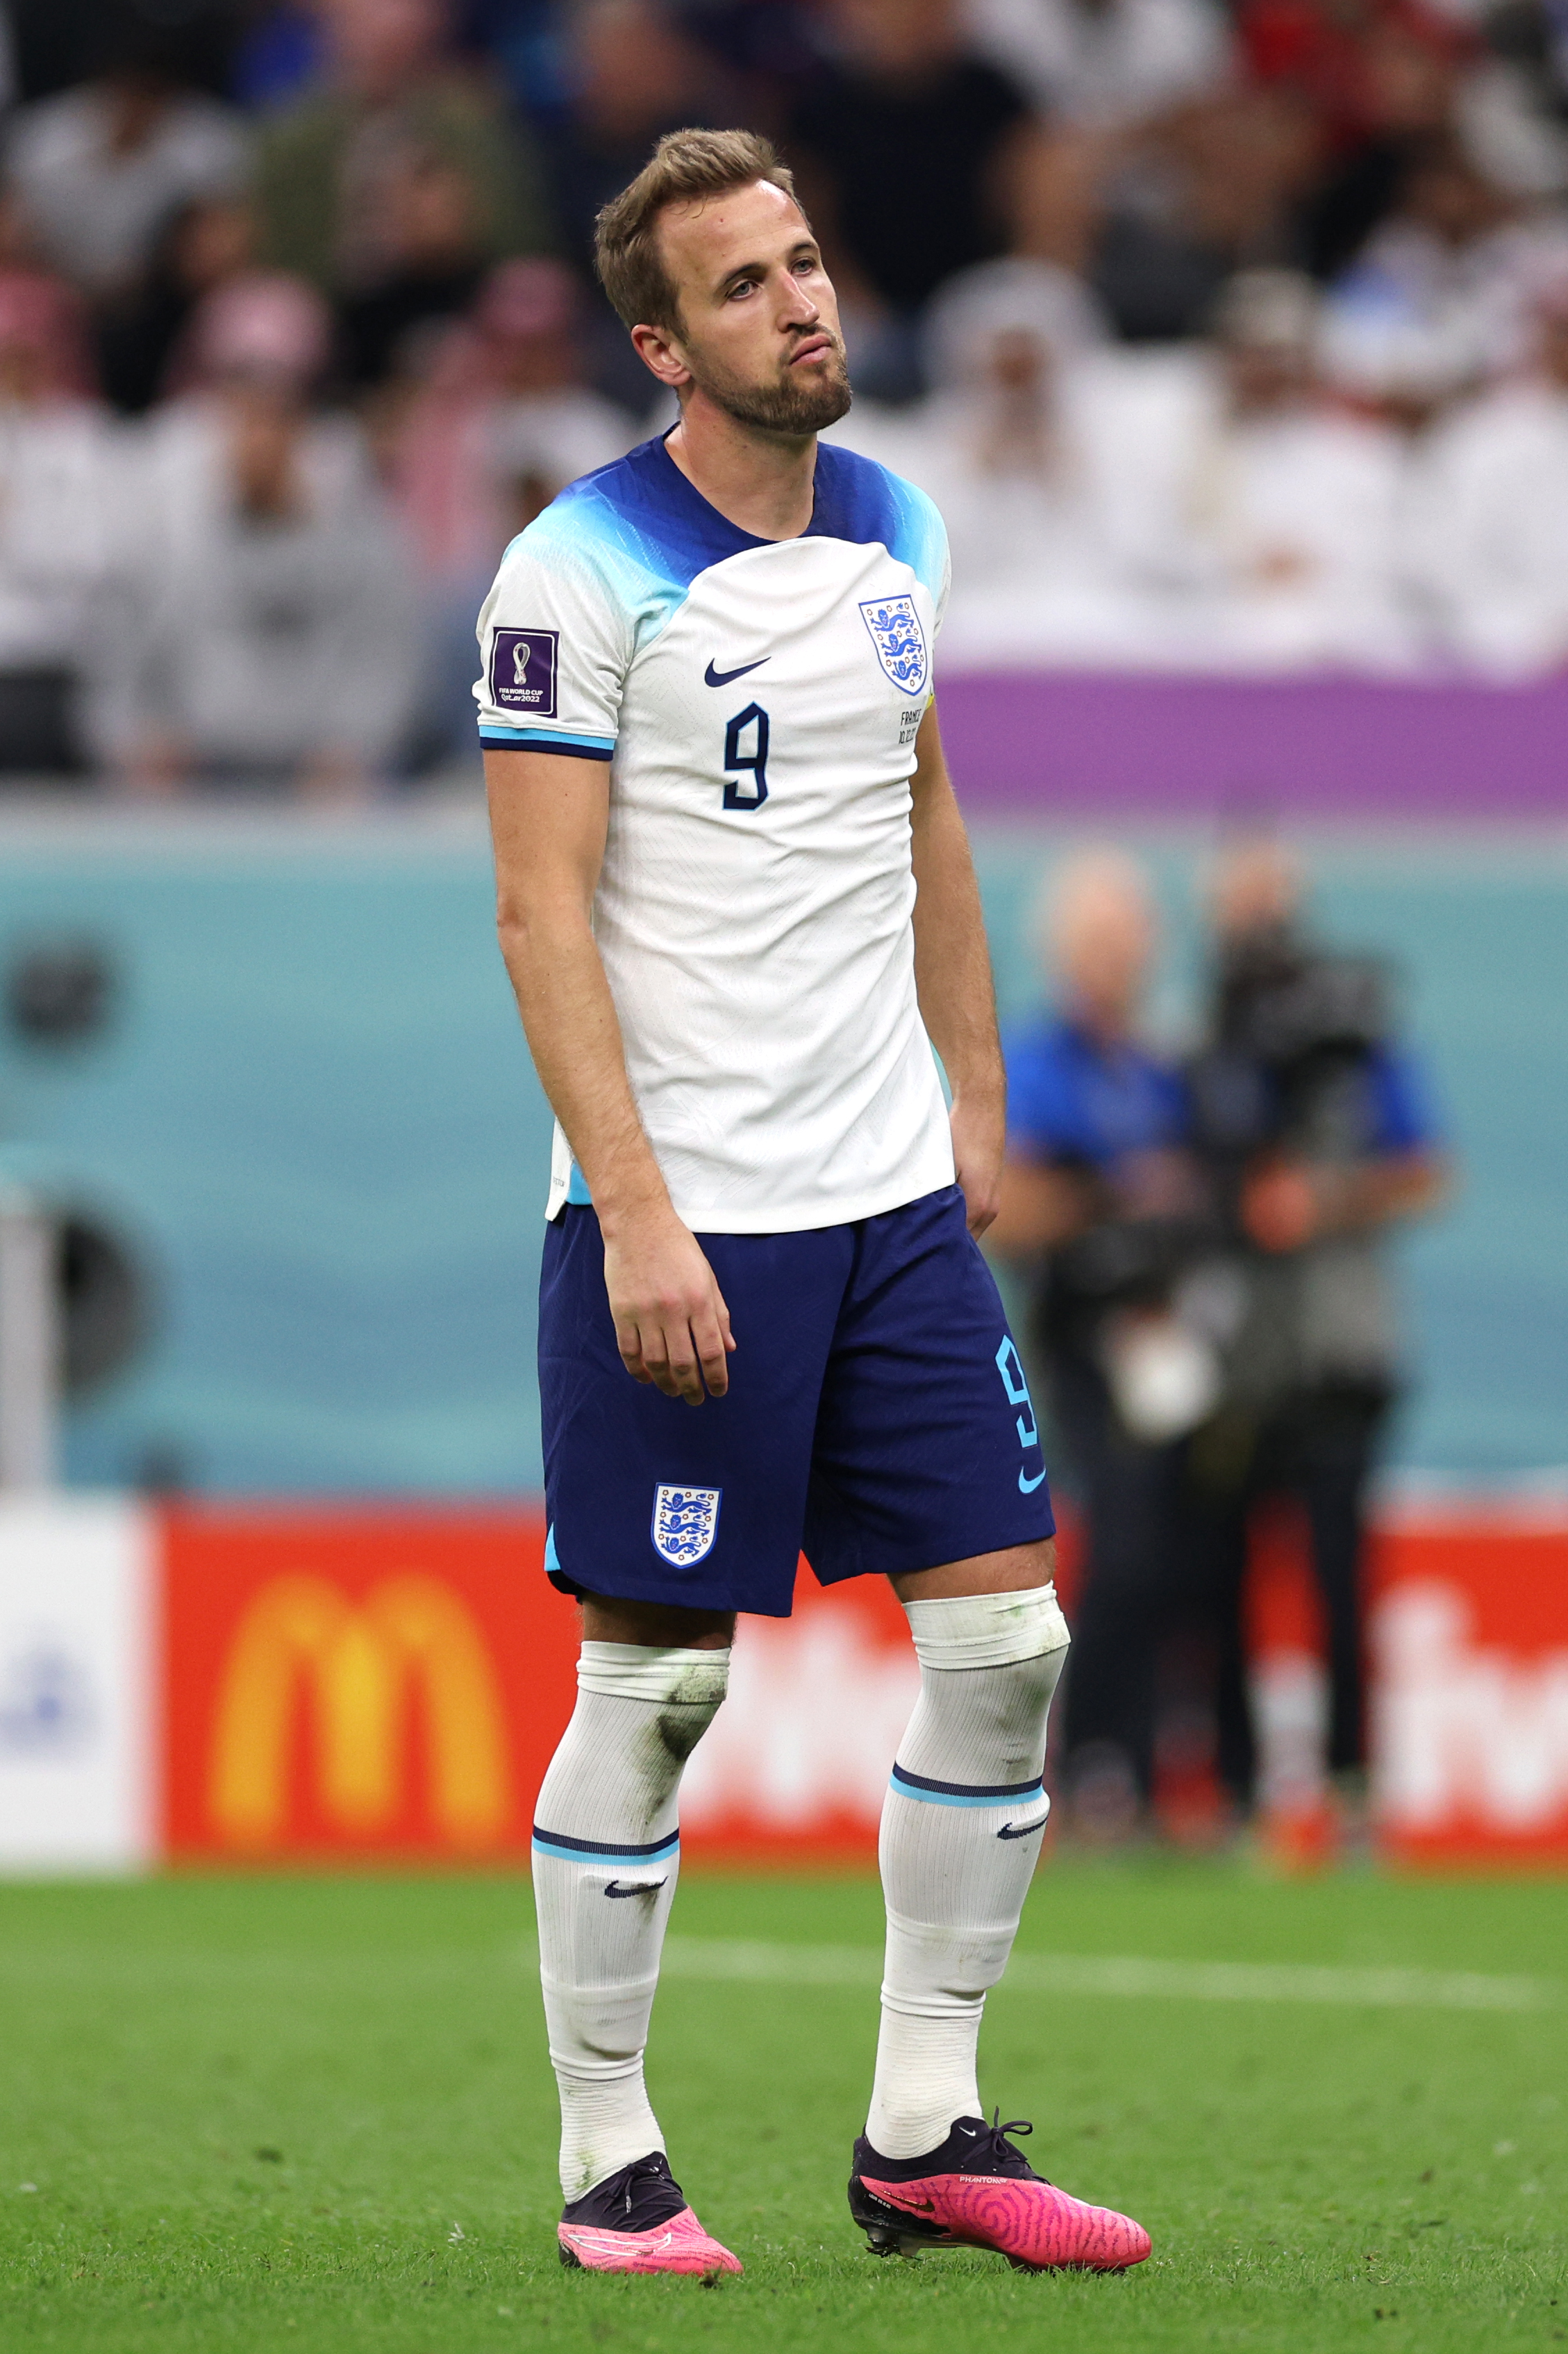 Harry Kane of England looks dejected after their sides’ elimination from the tournament during the FIFA World Cup Qatar 2022 quarter final match between England and France at Al Bayt Stadium on December 10, 2022 in Al Khor, Qatar.